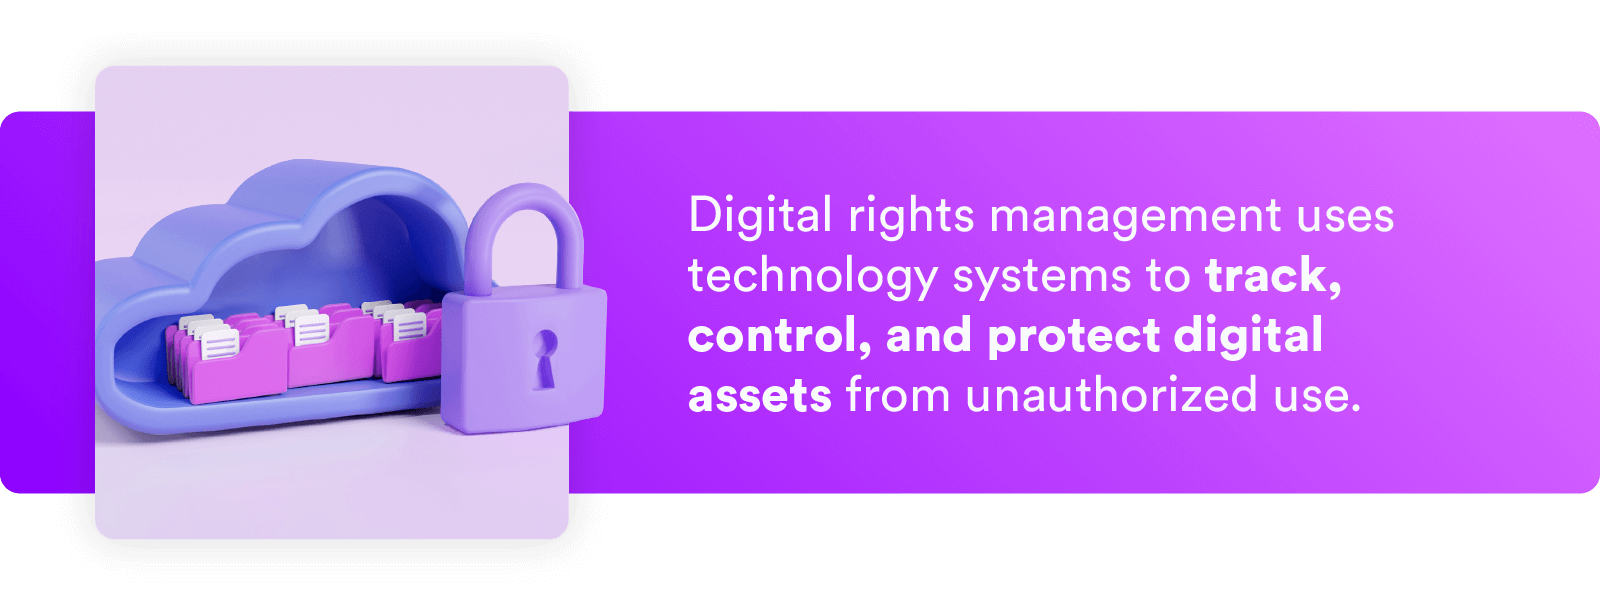 Digital rights management tracks, controls, and protects digital assets.